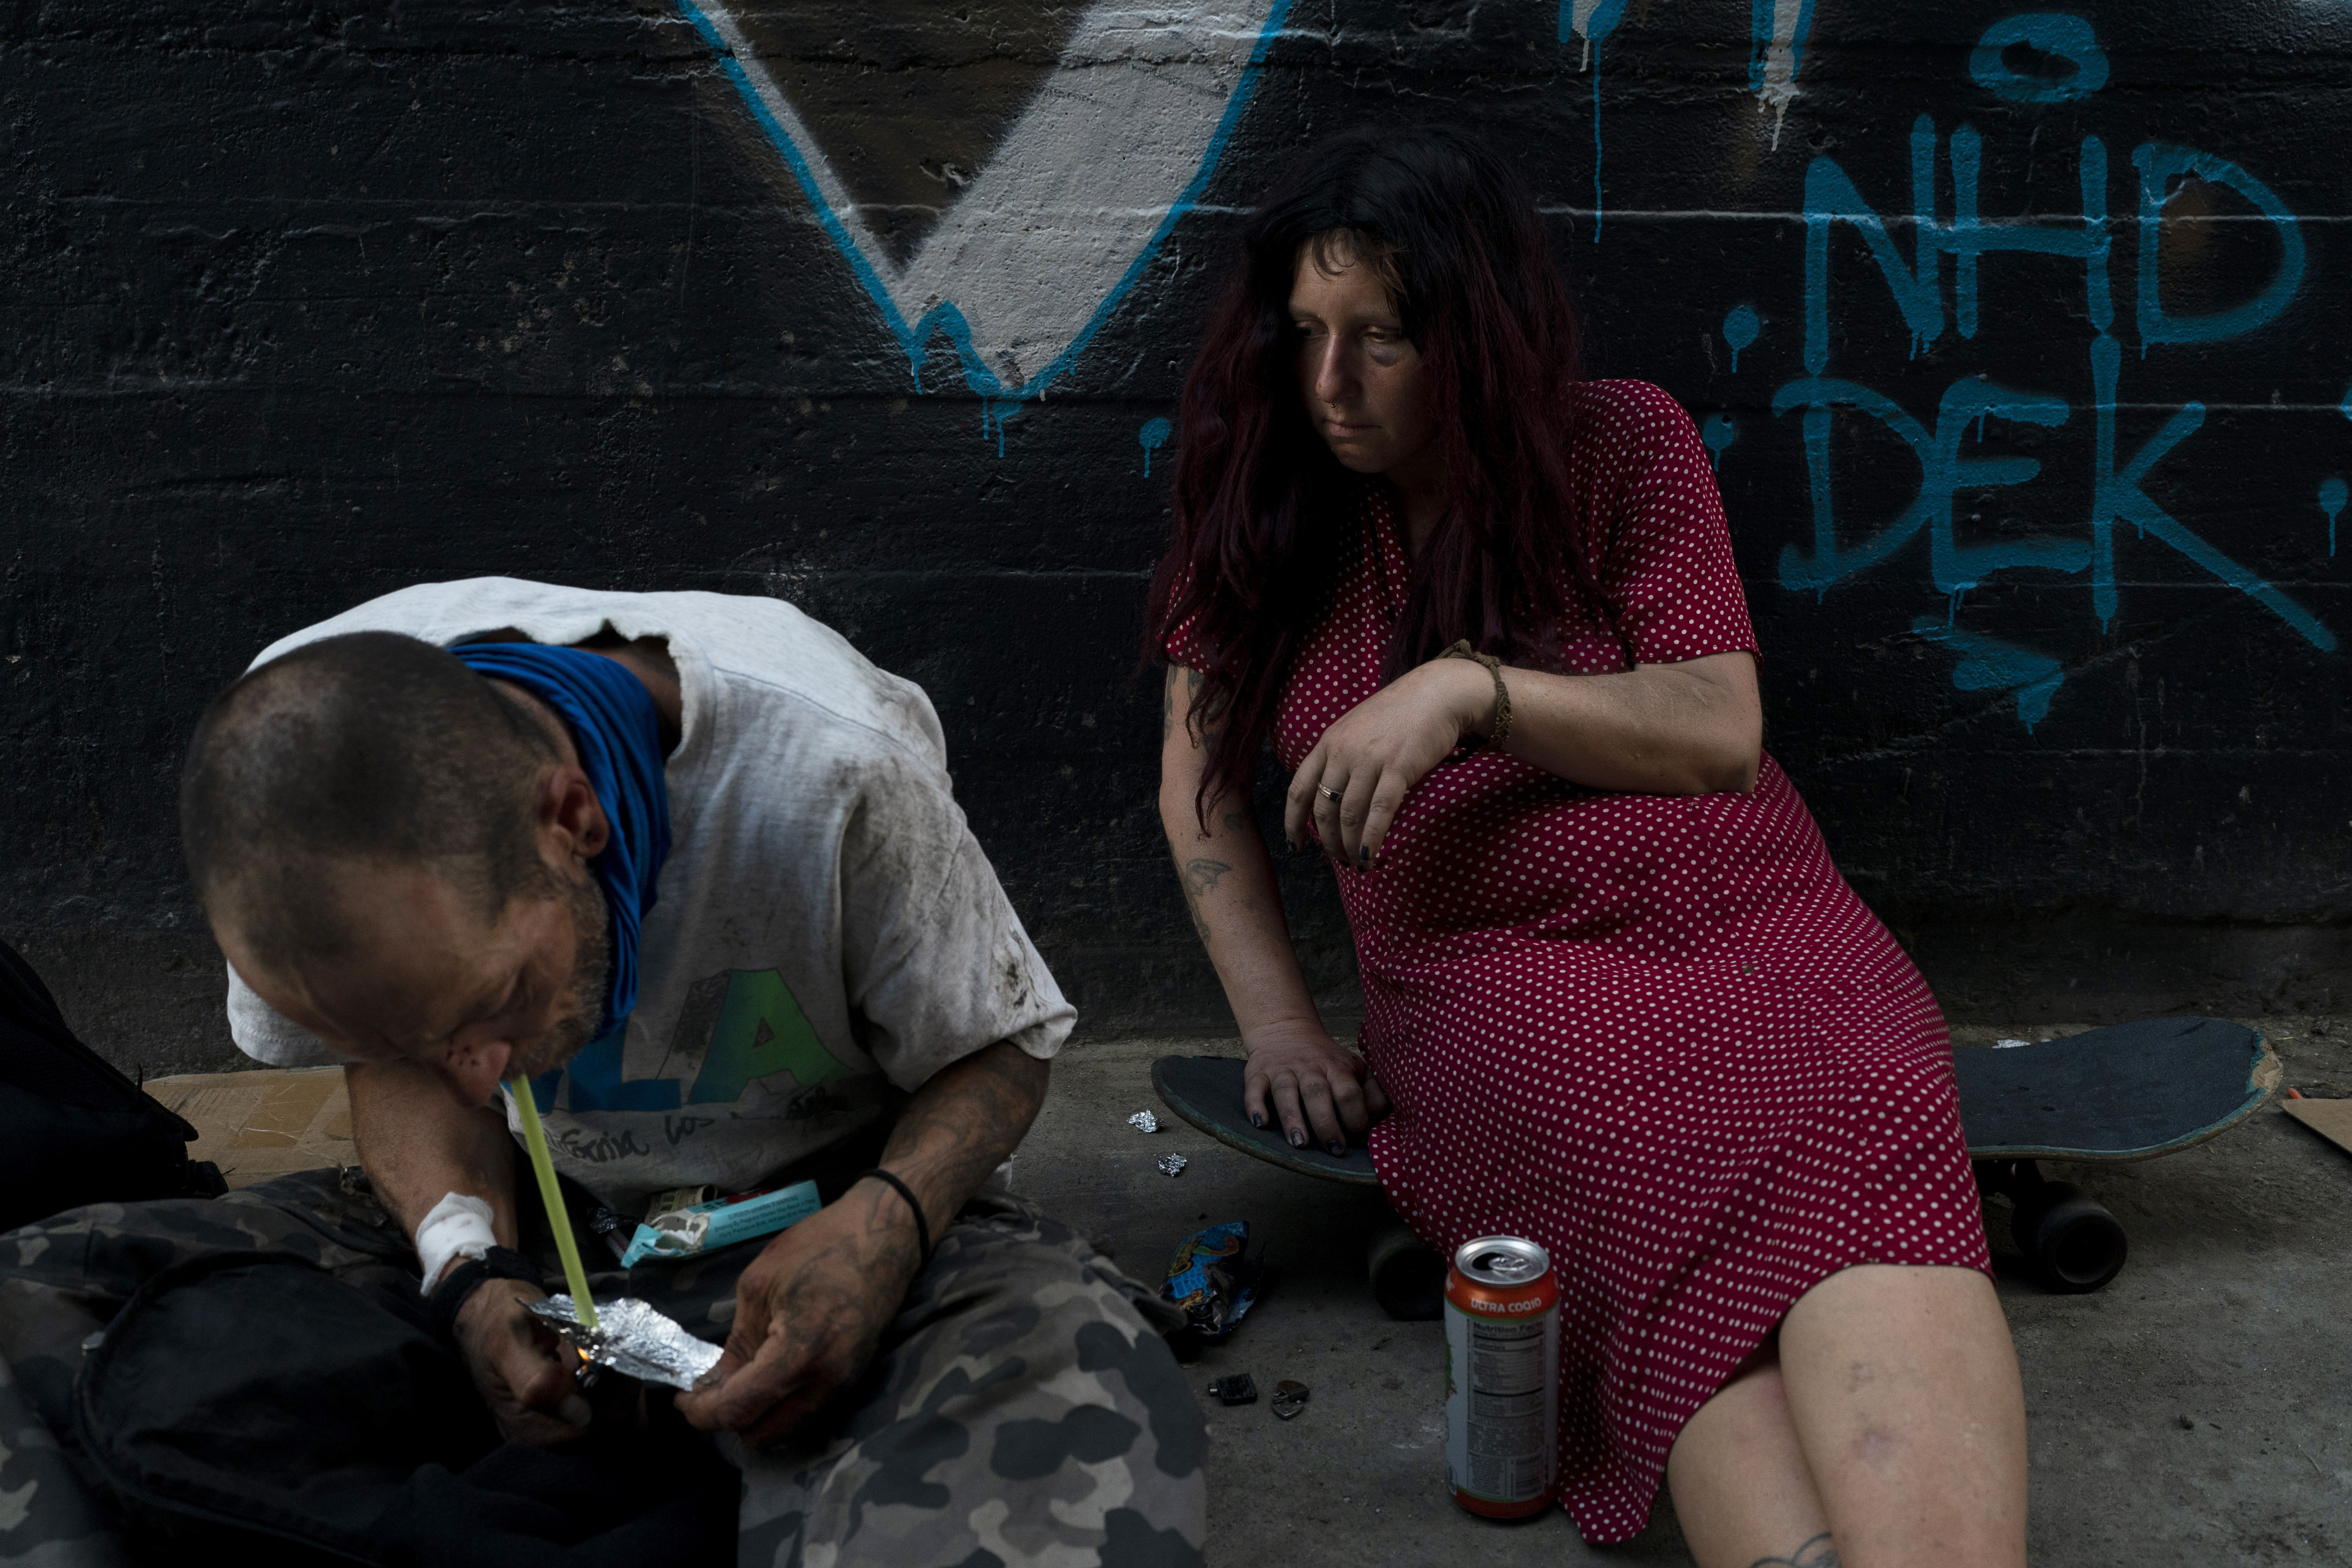 Jenn Bennett, who is high on fentanyl, sits on her skateboard with a black eye as her friend, Jesse Williams, smokes the drug on Tuesday, Aug. 9, 2022, in Los Angeles.  (AP Photo/Jae C. Hong)